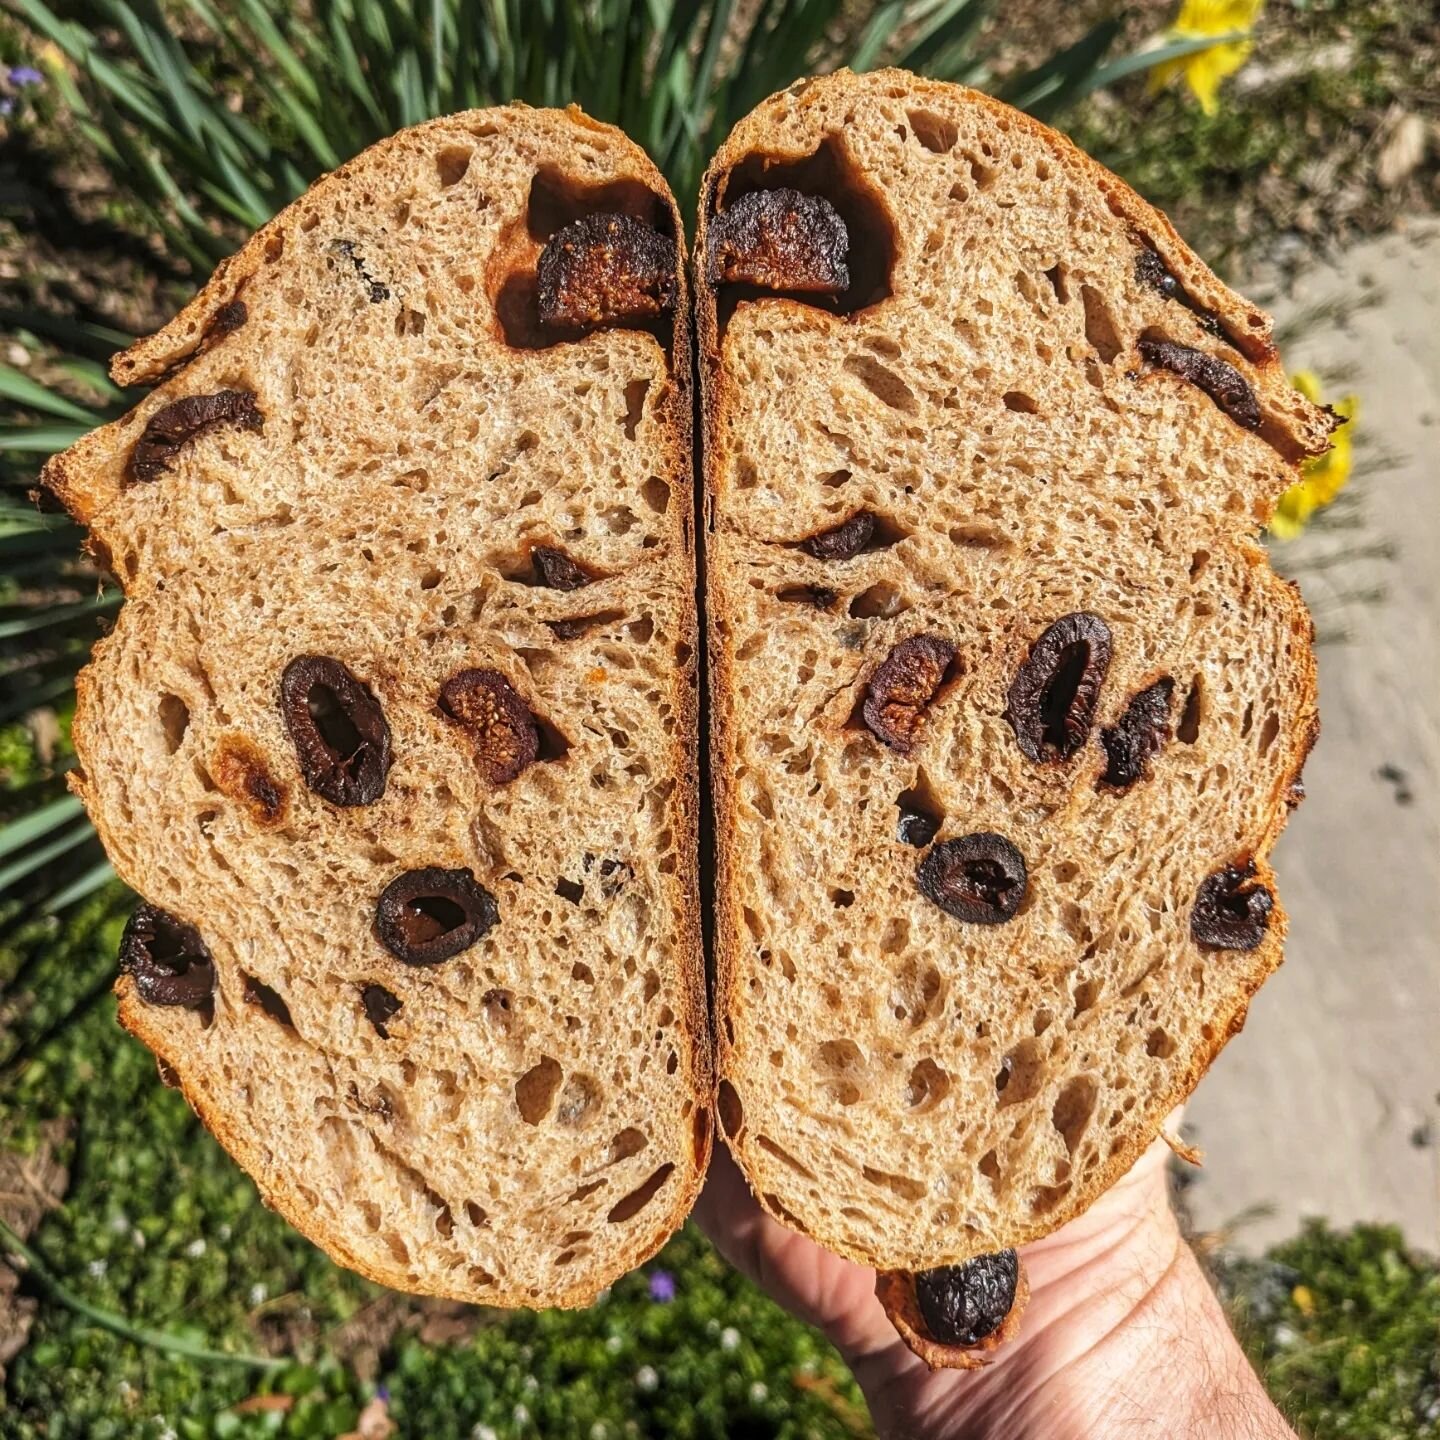 This weeks bread subscribers (only) Baker's Special! 

Black Mission Fig and Black Cured Olive Sourdough!! This one is an instant hit. 

Thanks to @matthewjamesduffy for the eternal inspiration!